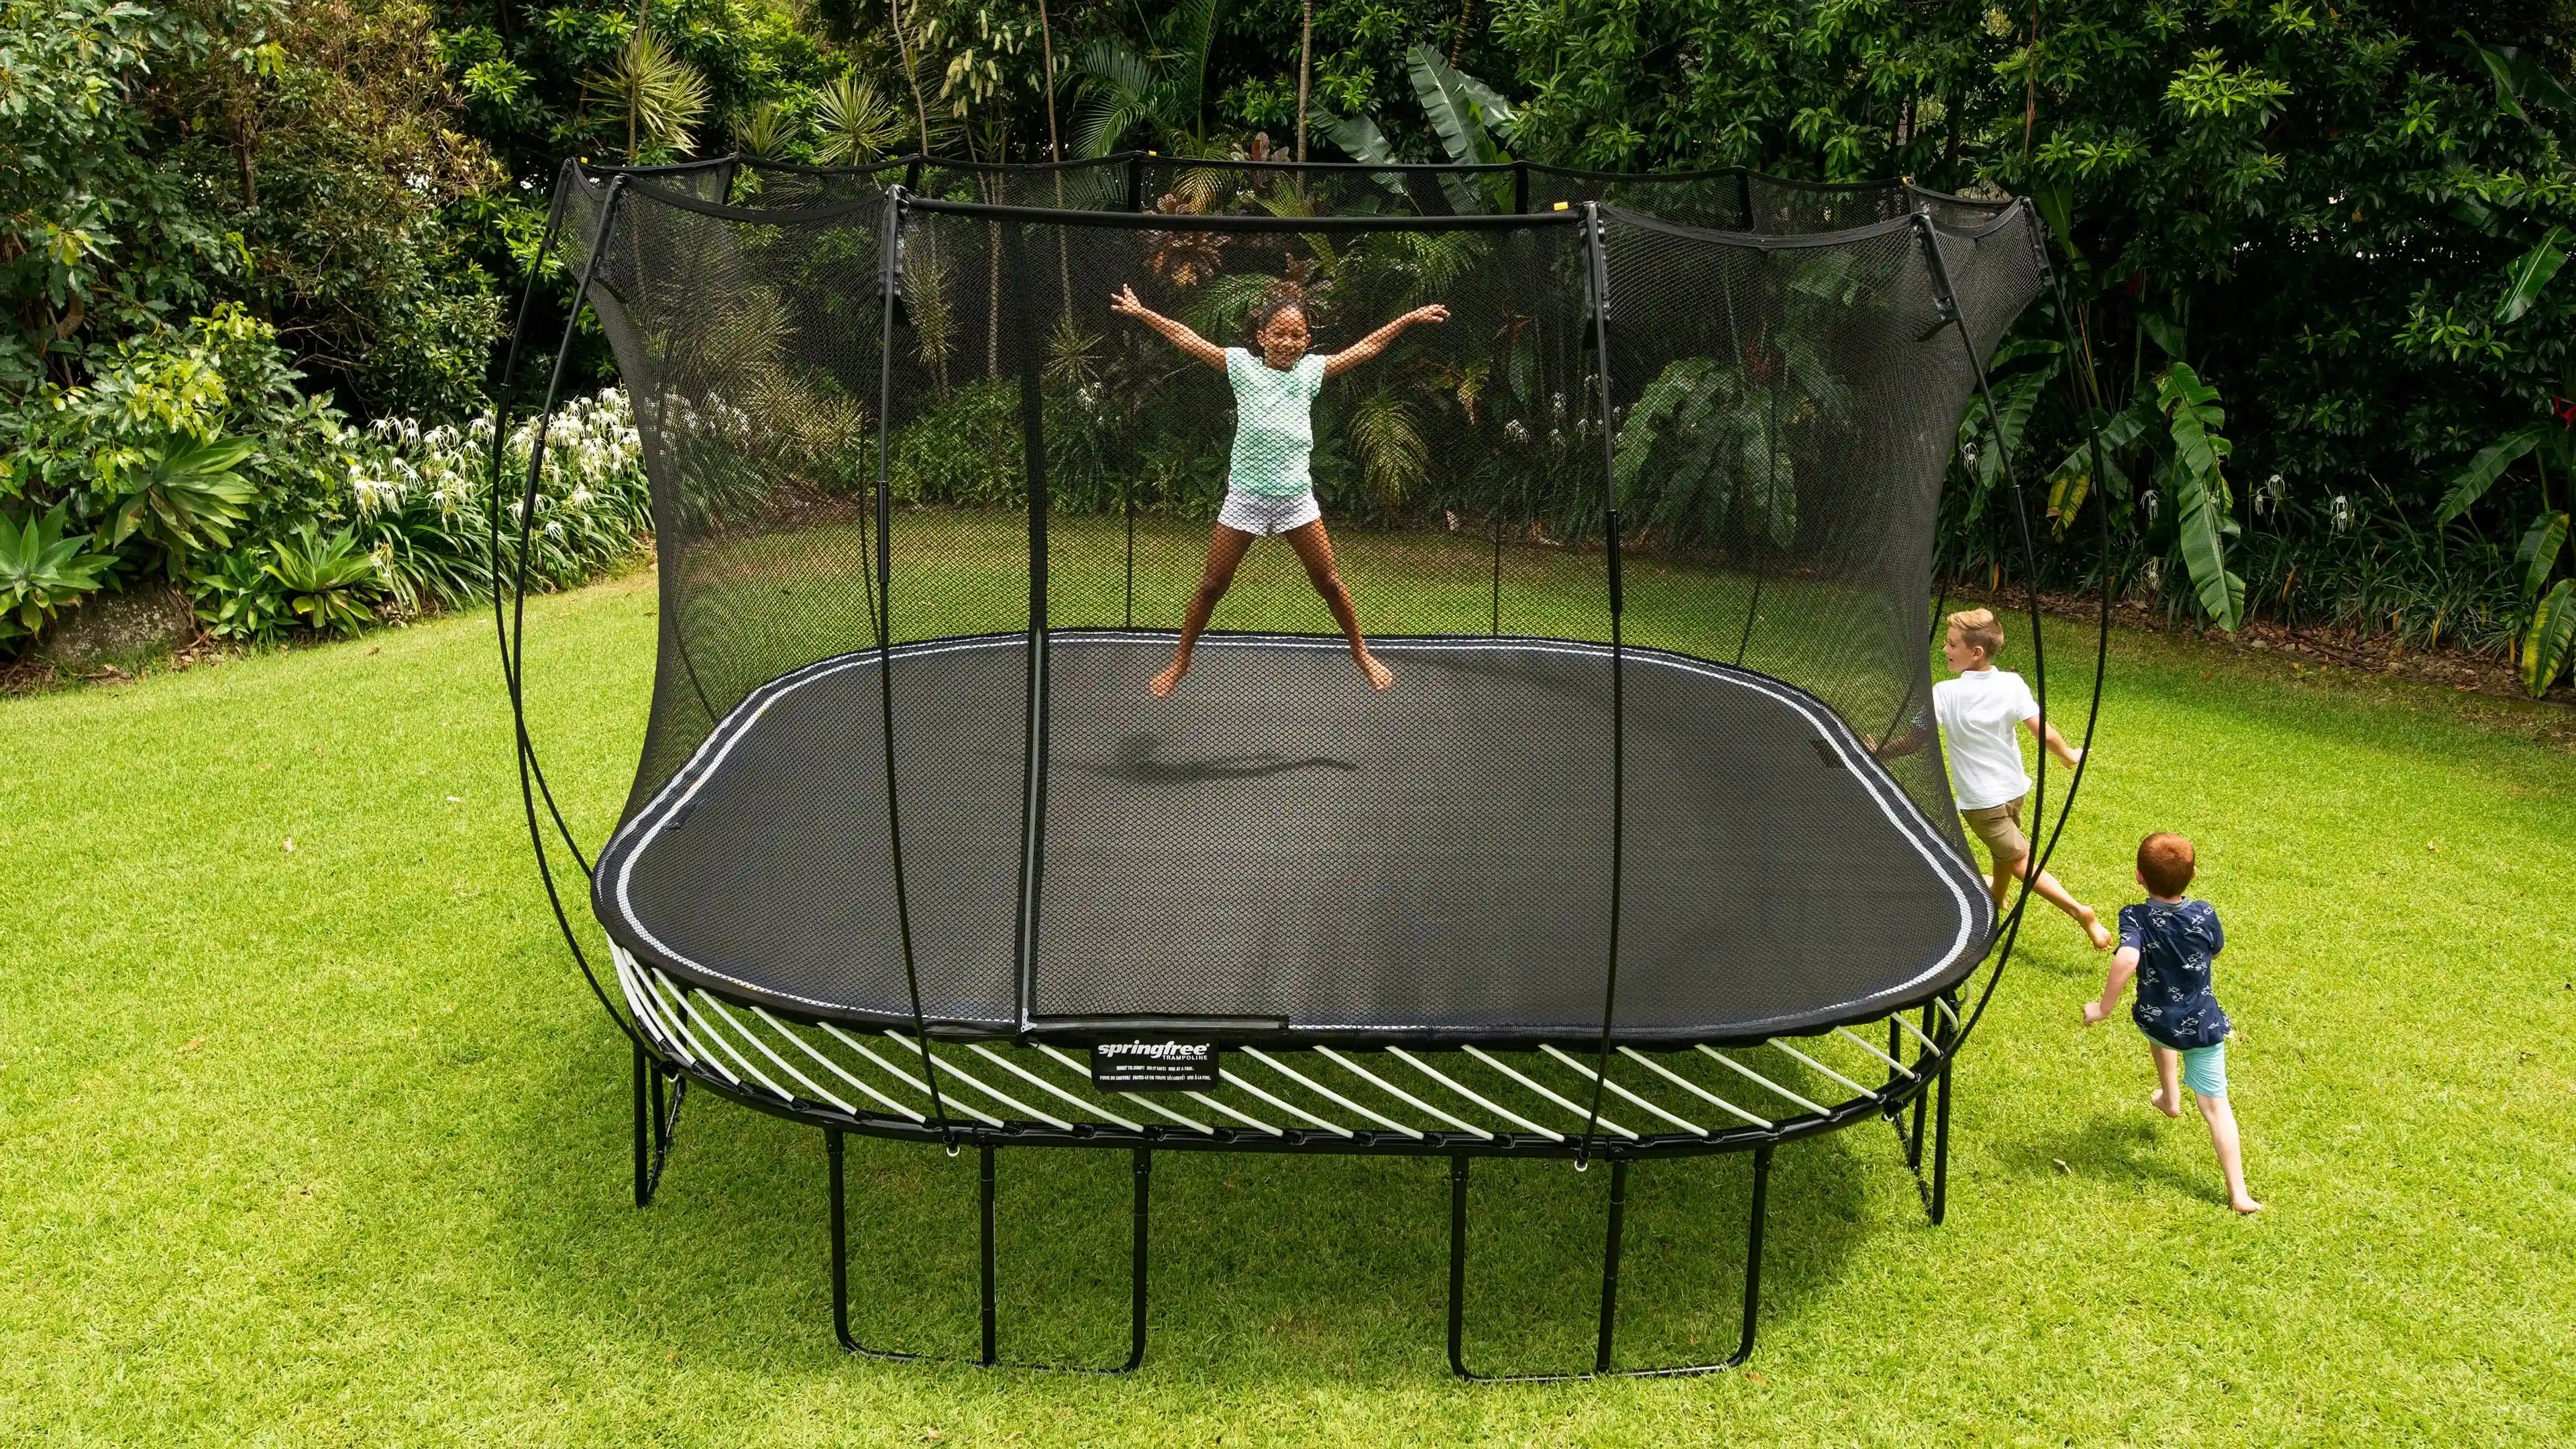 girl jumping on a trampoline while kids are playing around